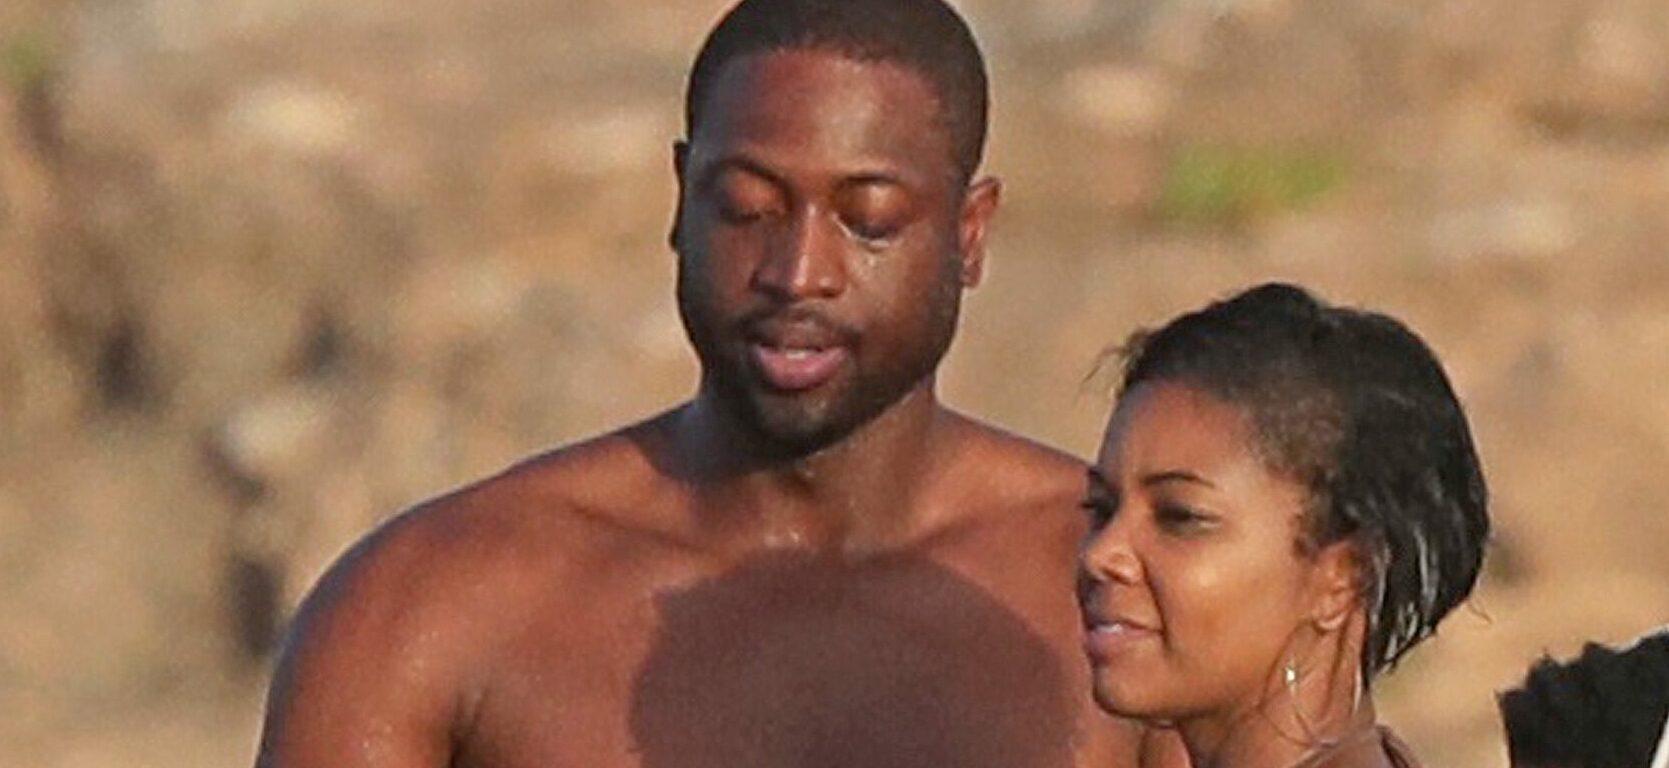 Gabrielle Union and Dwayne Wade on holiday in Ibiza